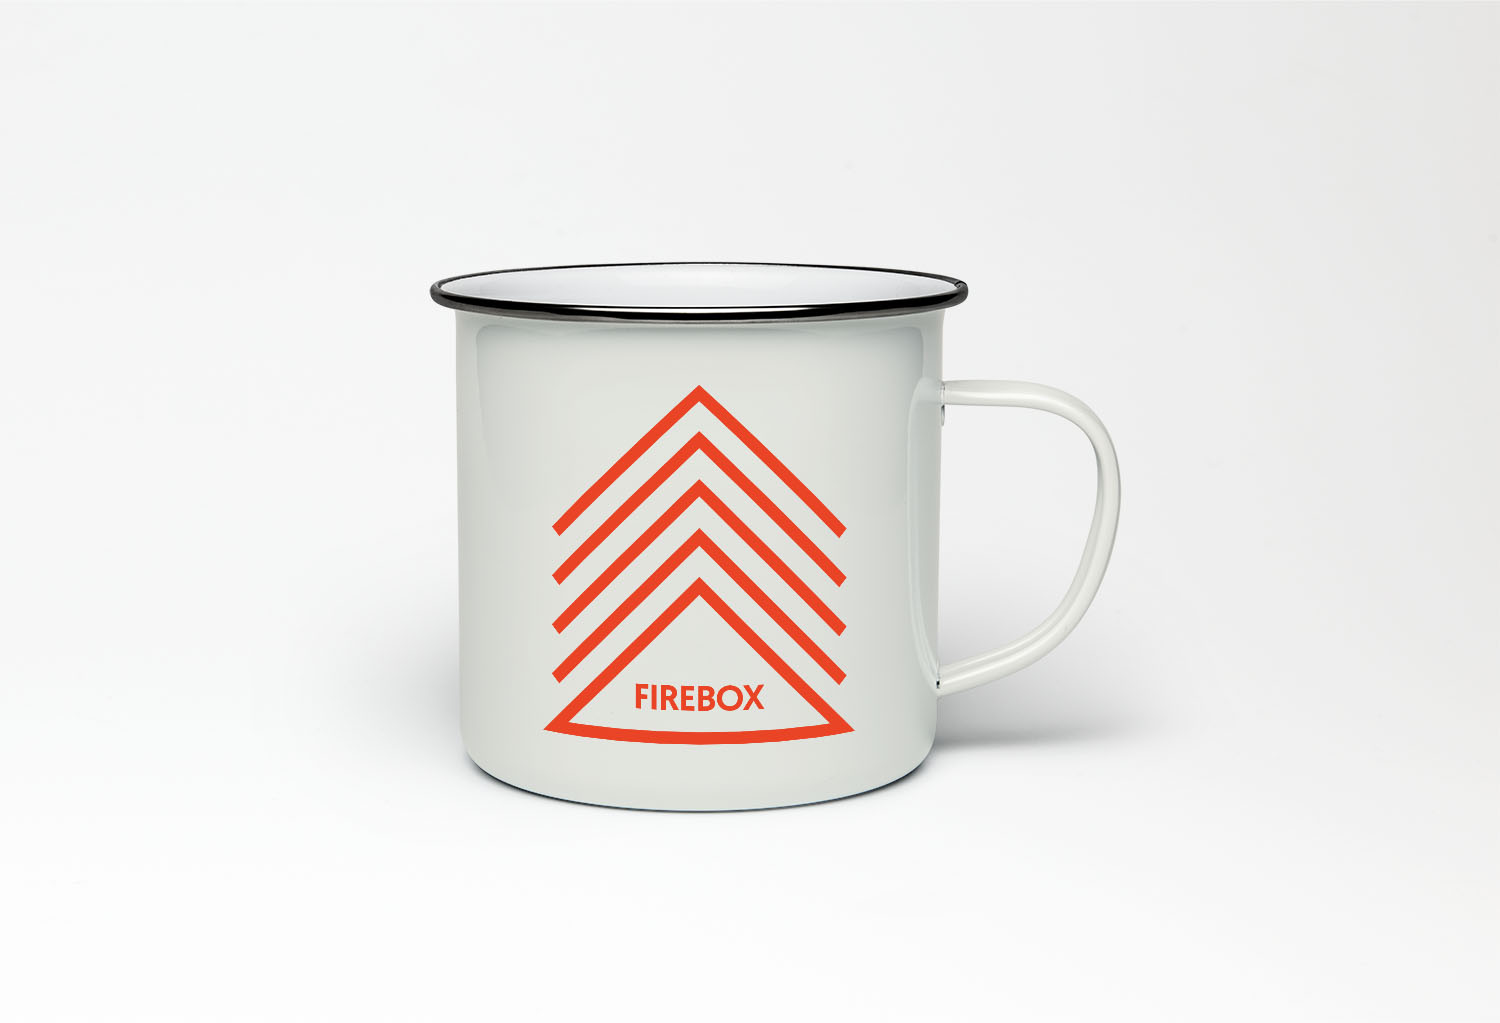 Enamel mug with abstract fire design